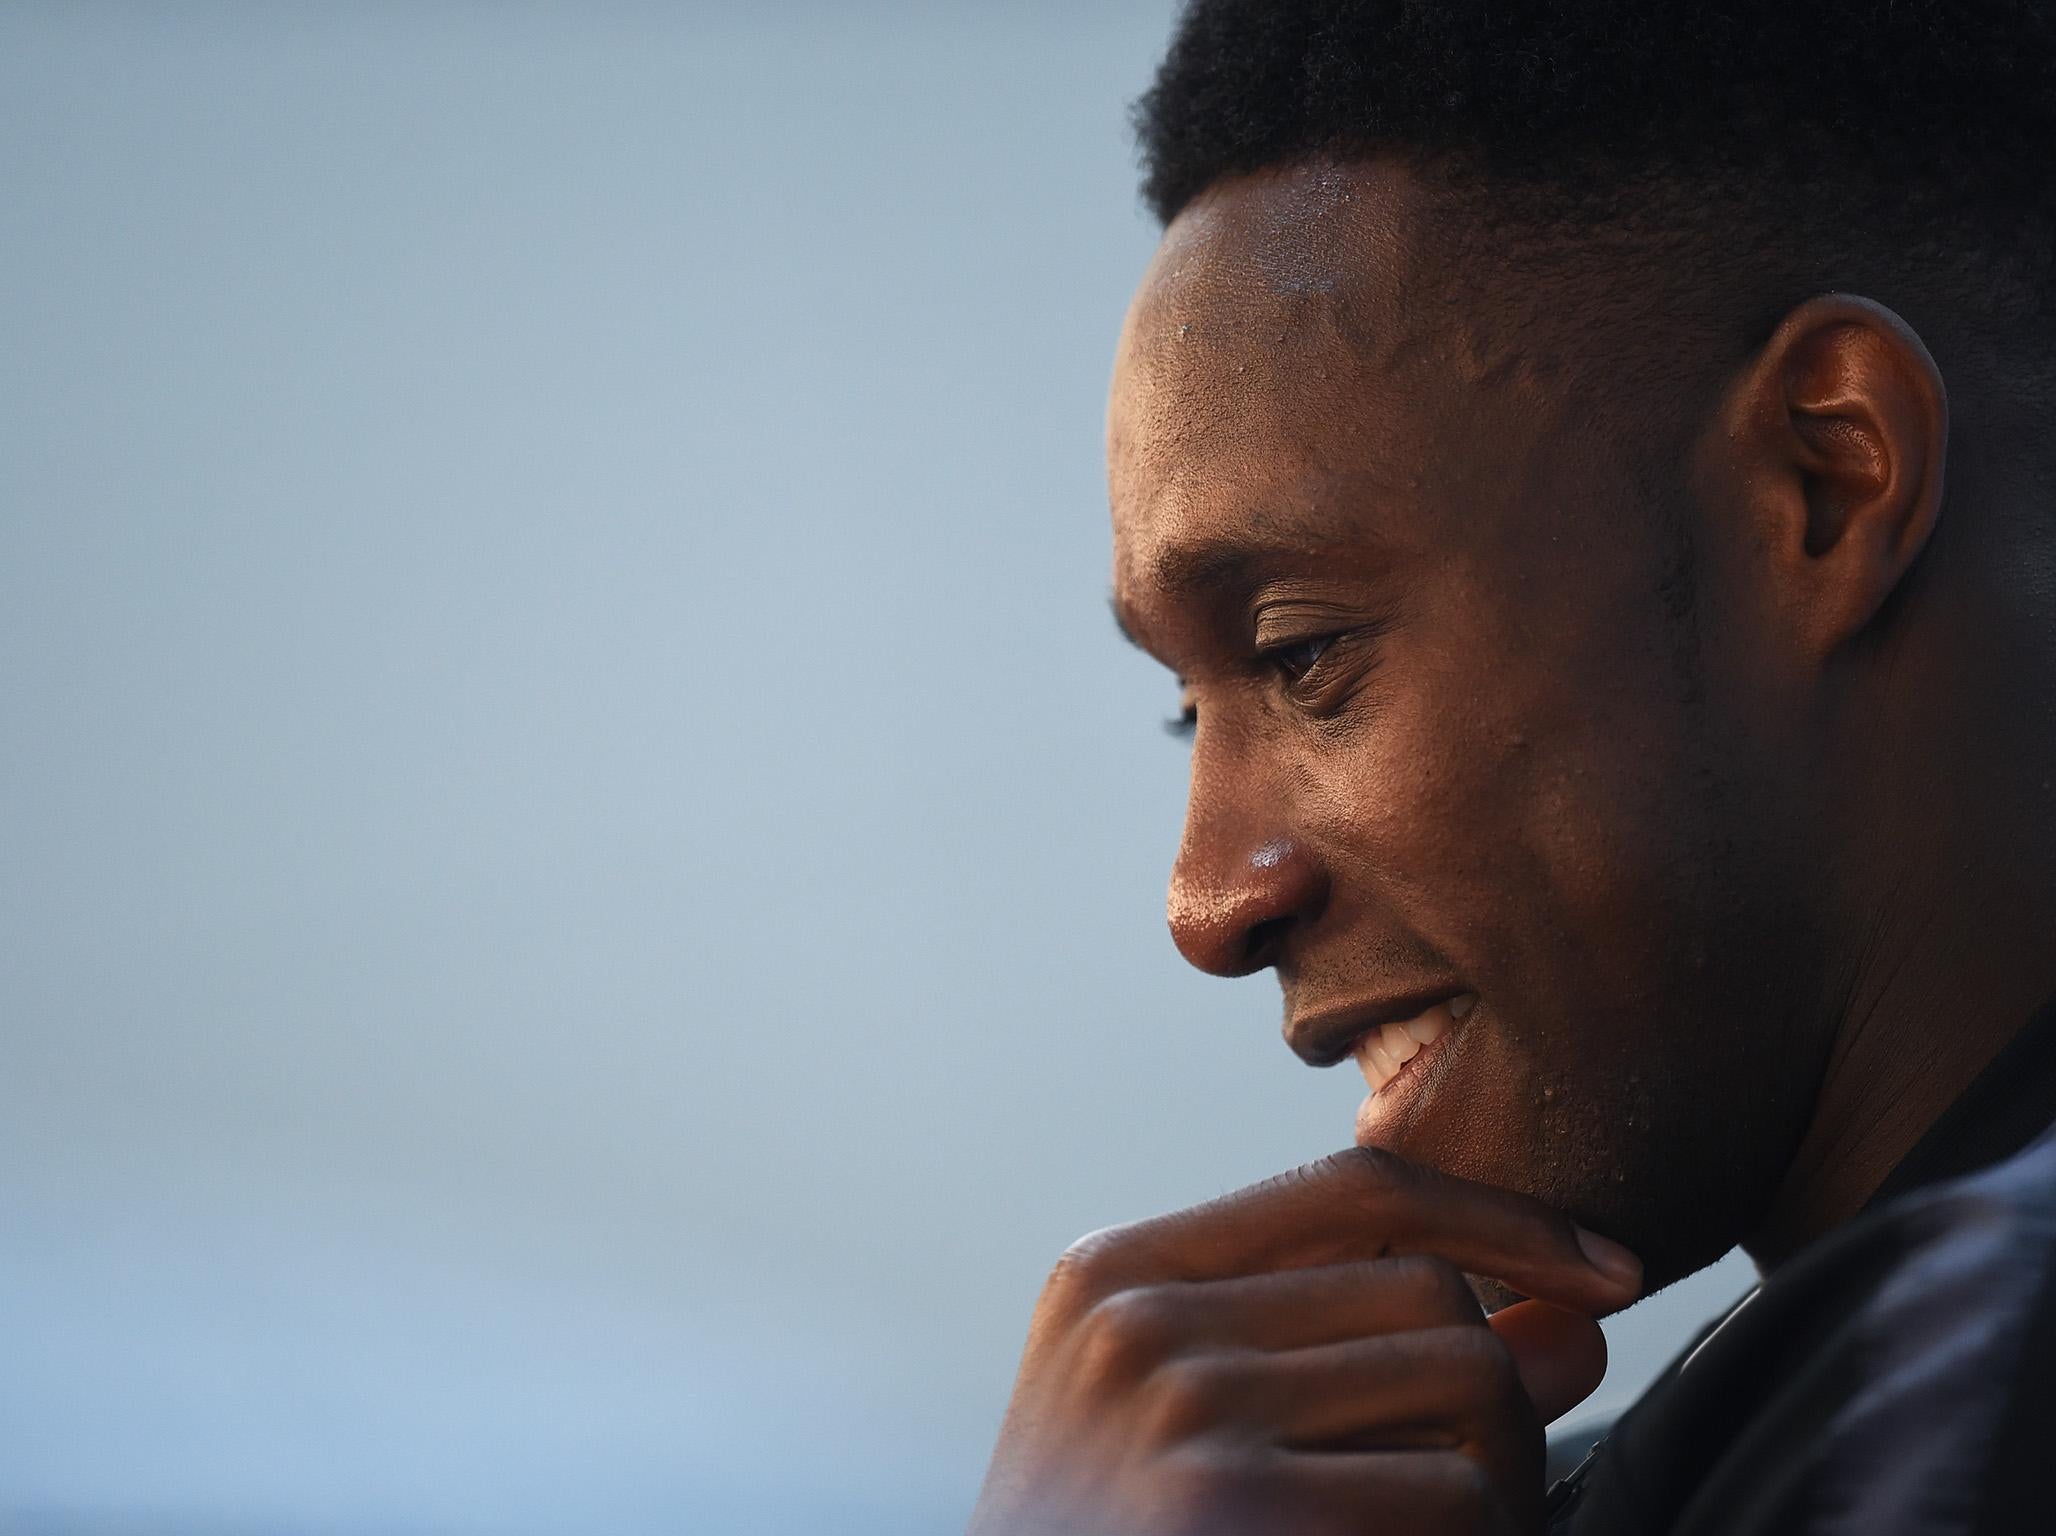 Danny Welbeck spoke to the media at St George's Park